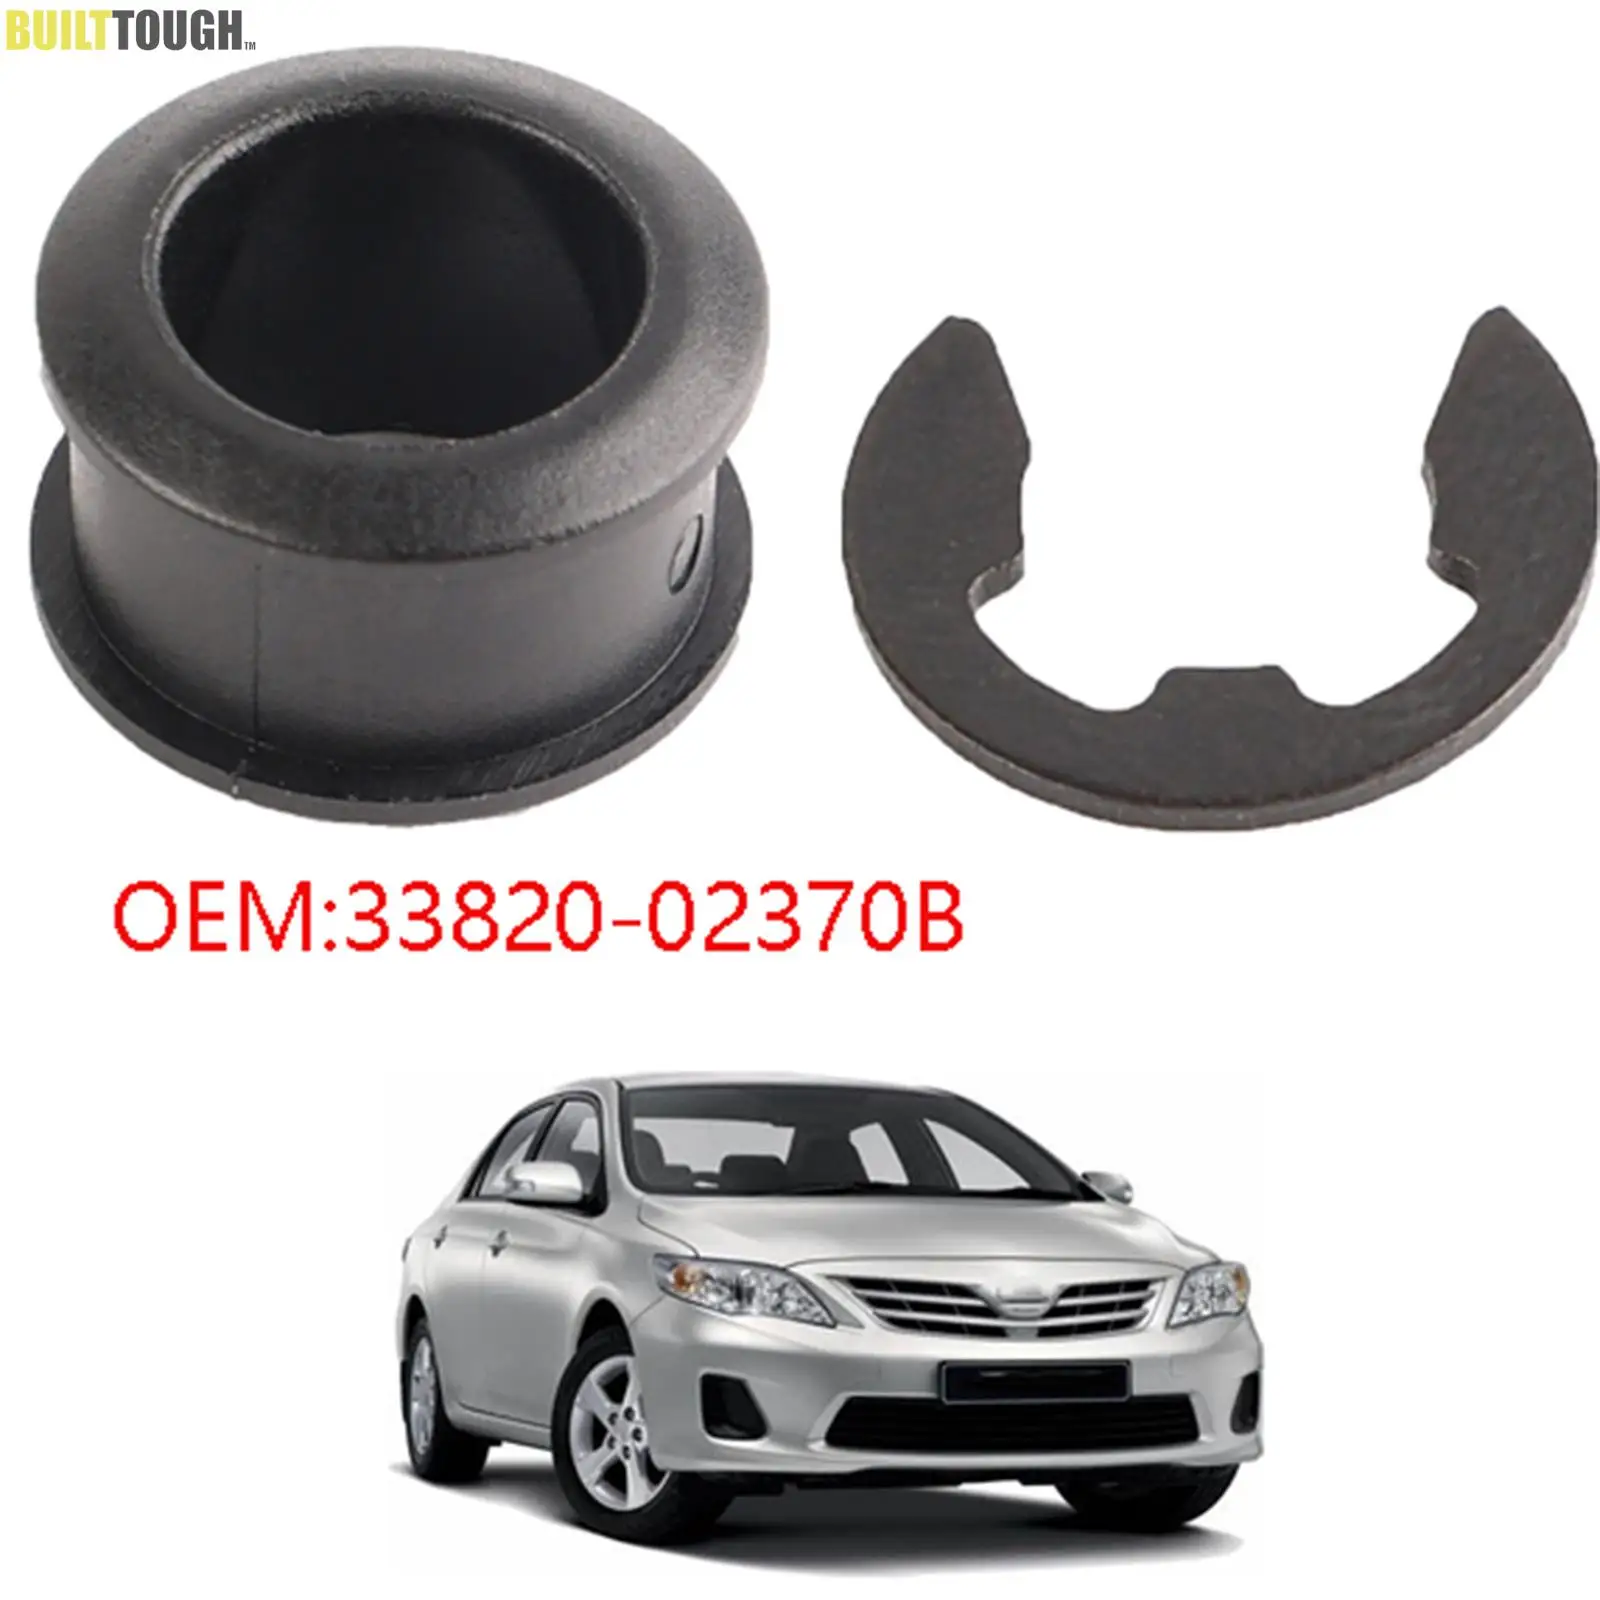 

Black plastic Automatic Transmission Shift Shifter Cable Bushing replacement for Toyota Corolla Matrix 2003-2008 33820-02370B